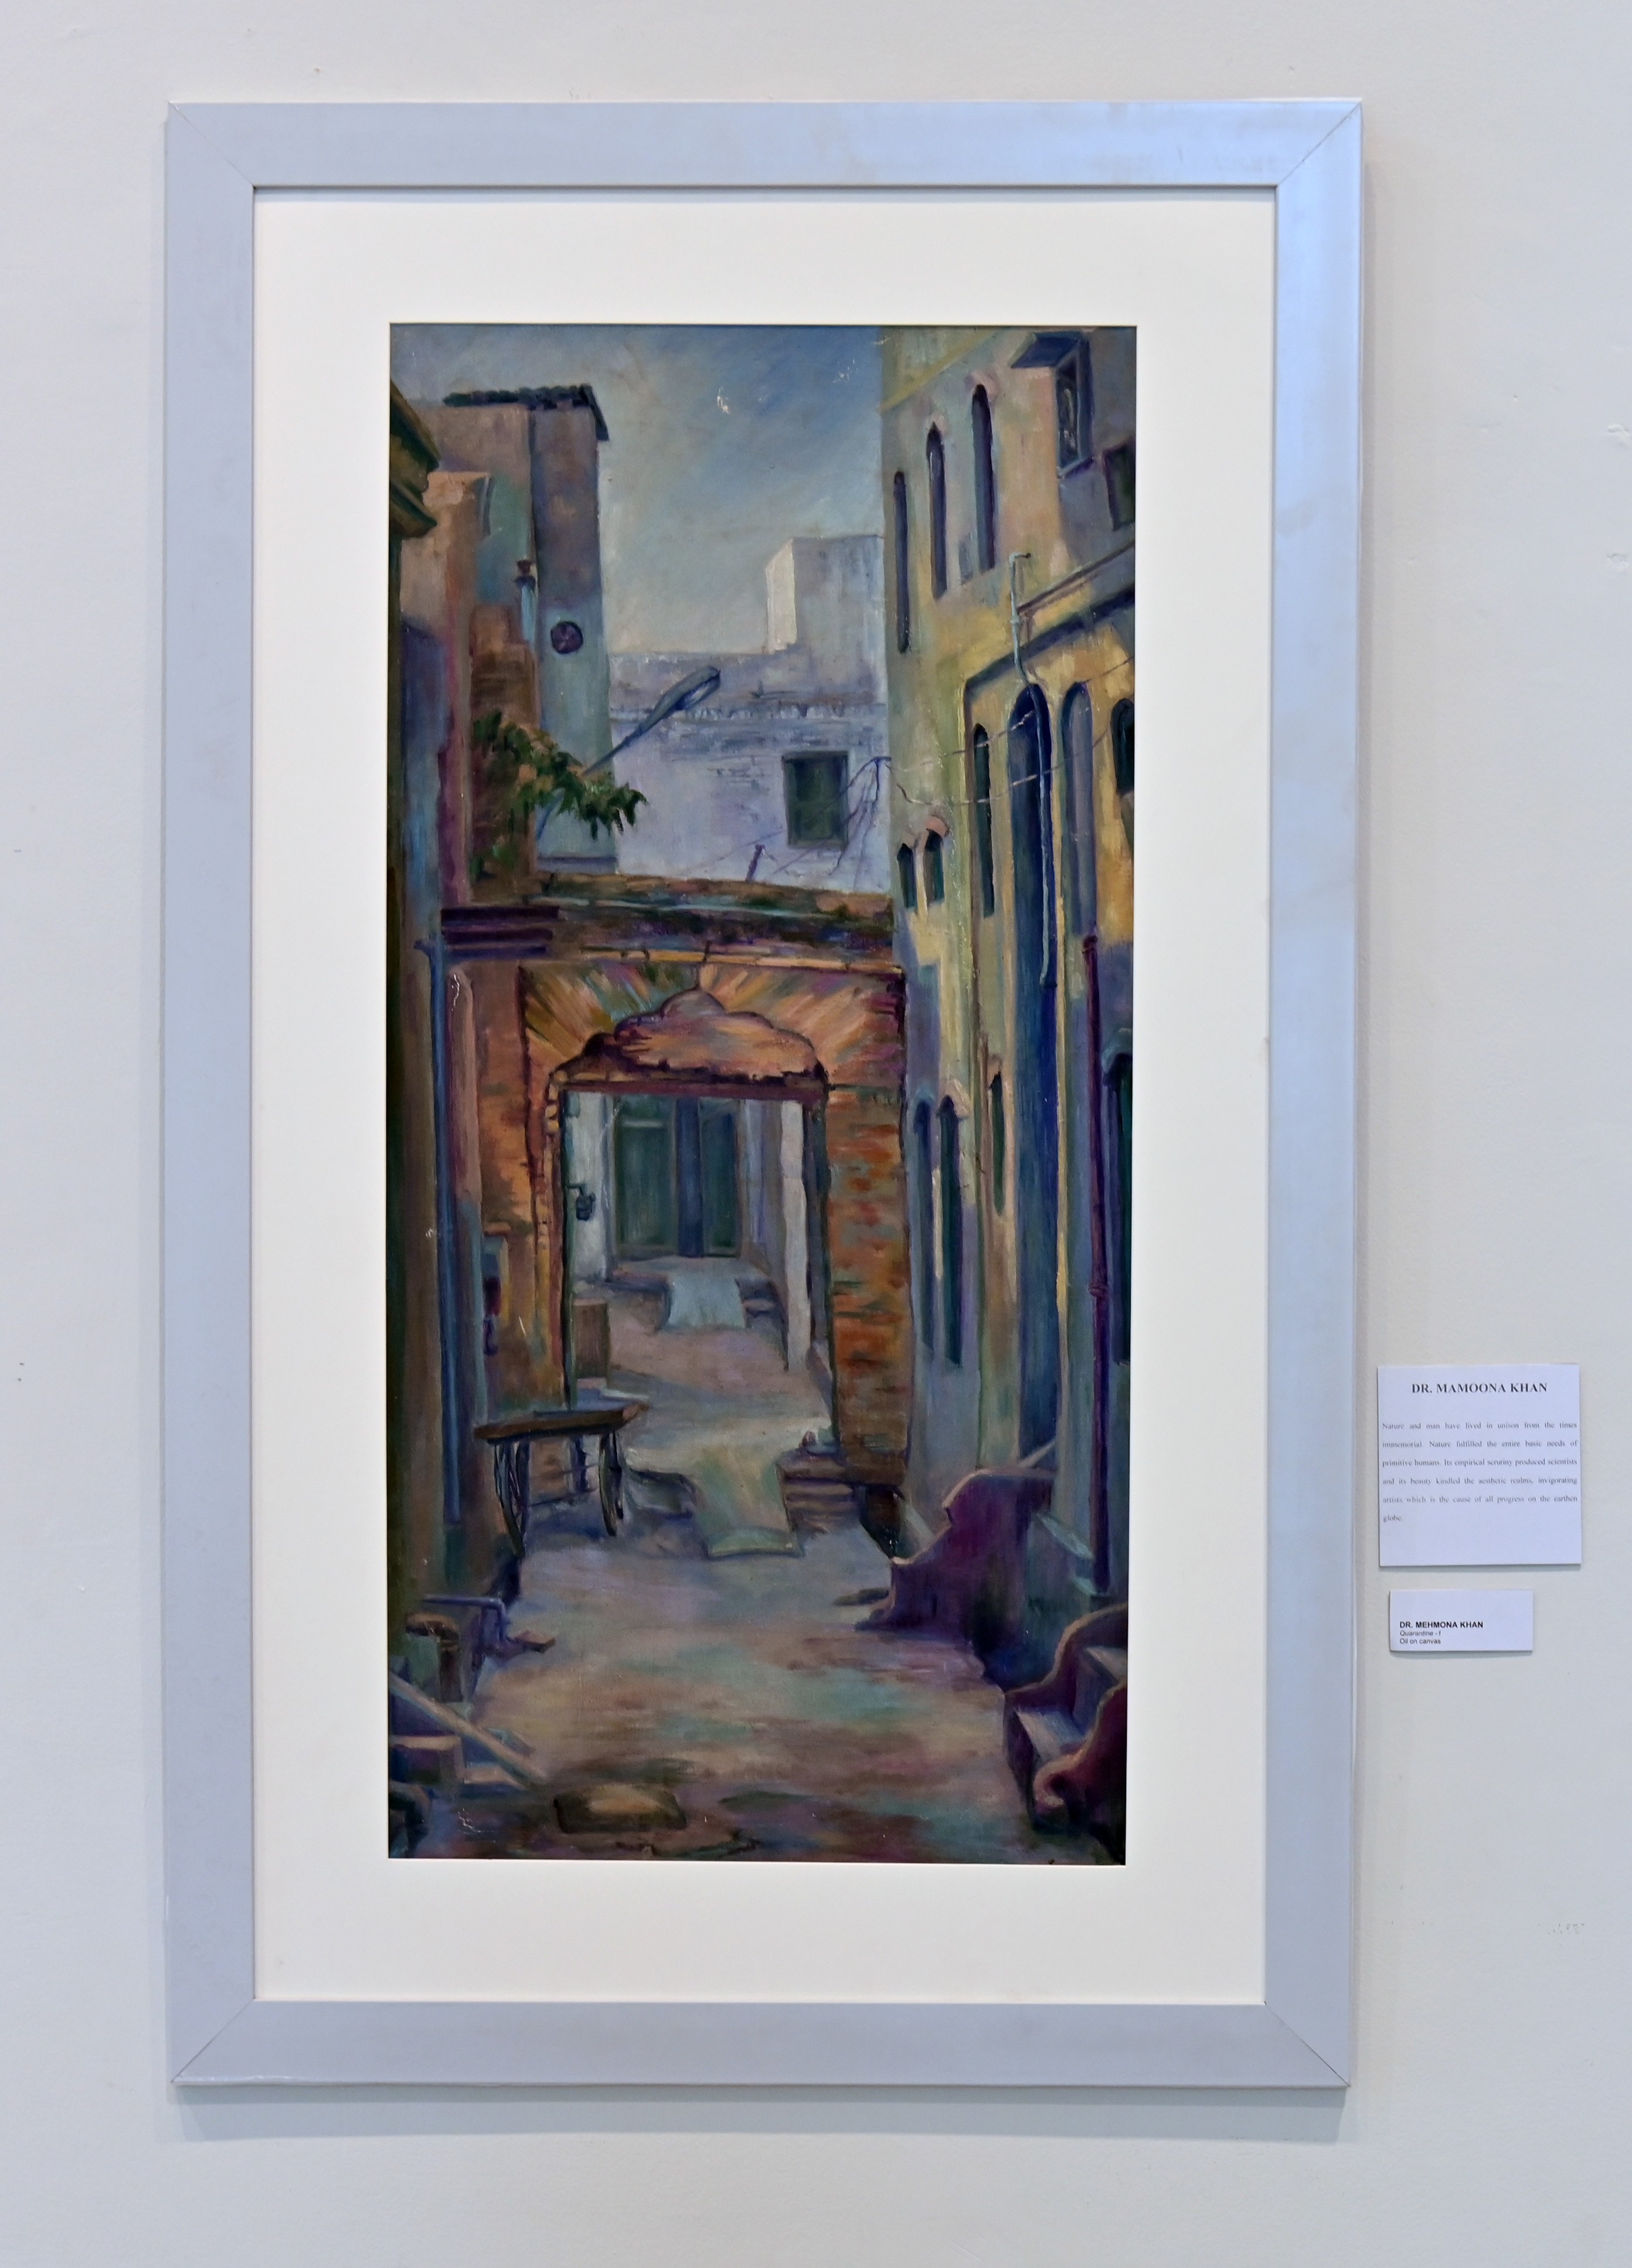 The painting showing the empty street